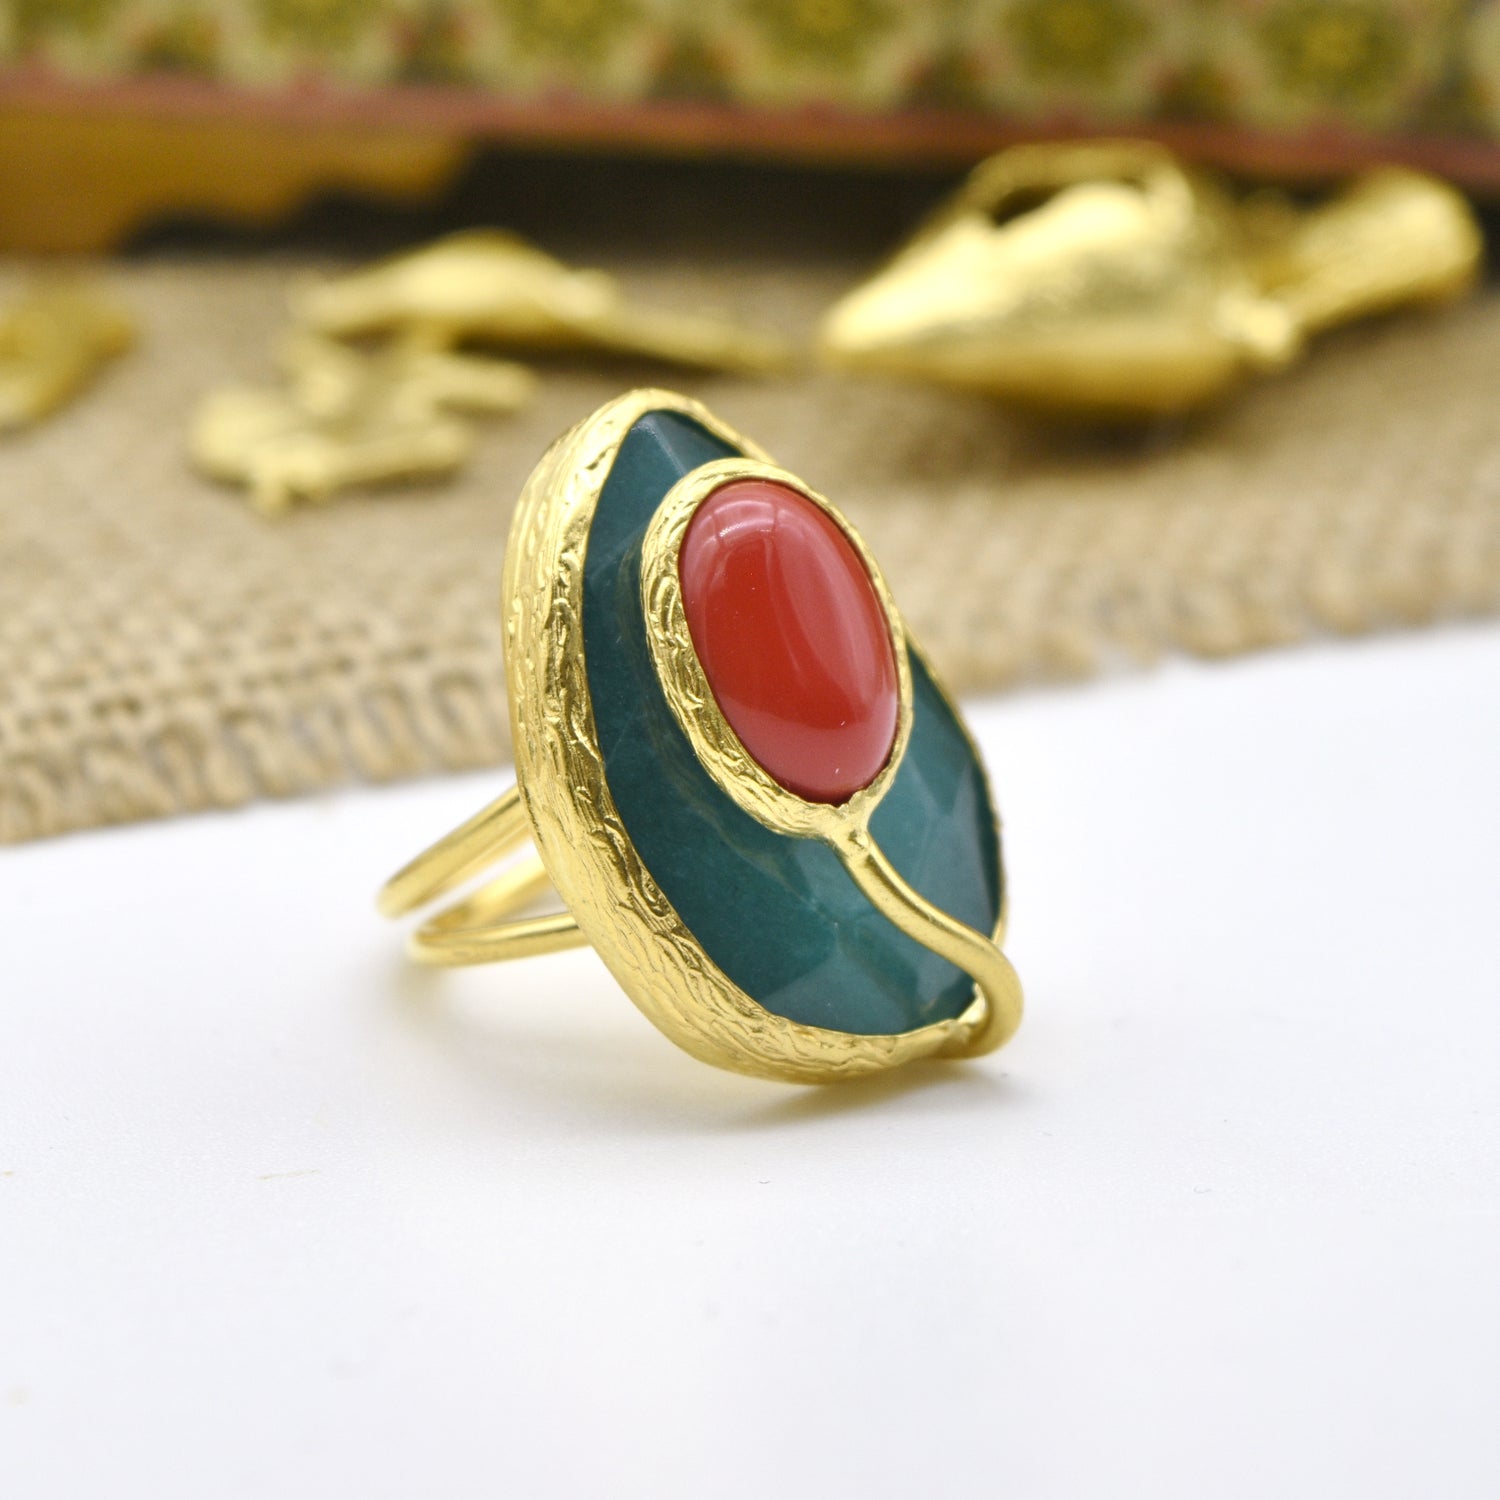 Aylas Jade, Red coral semi precious gemstone adjustable ring - 21ct Gold plated brass